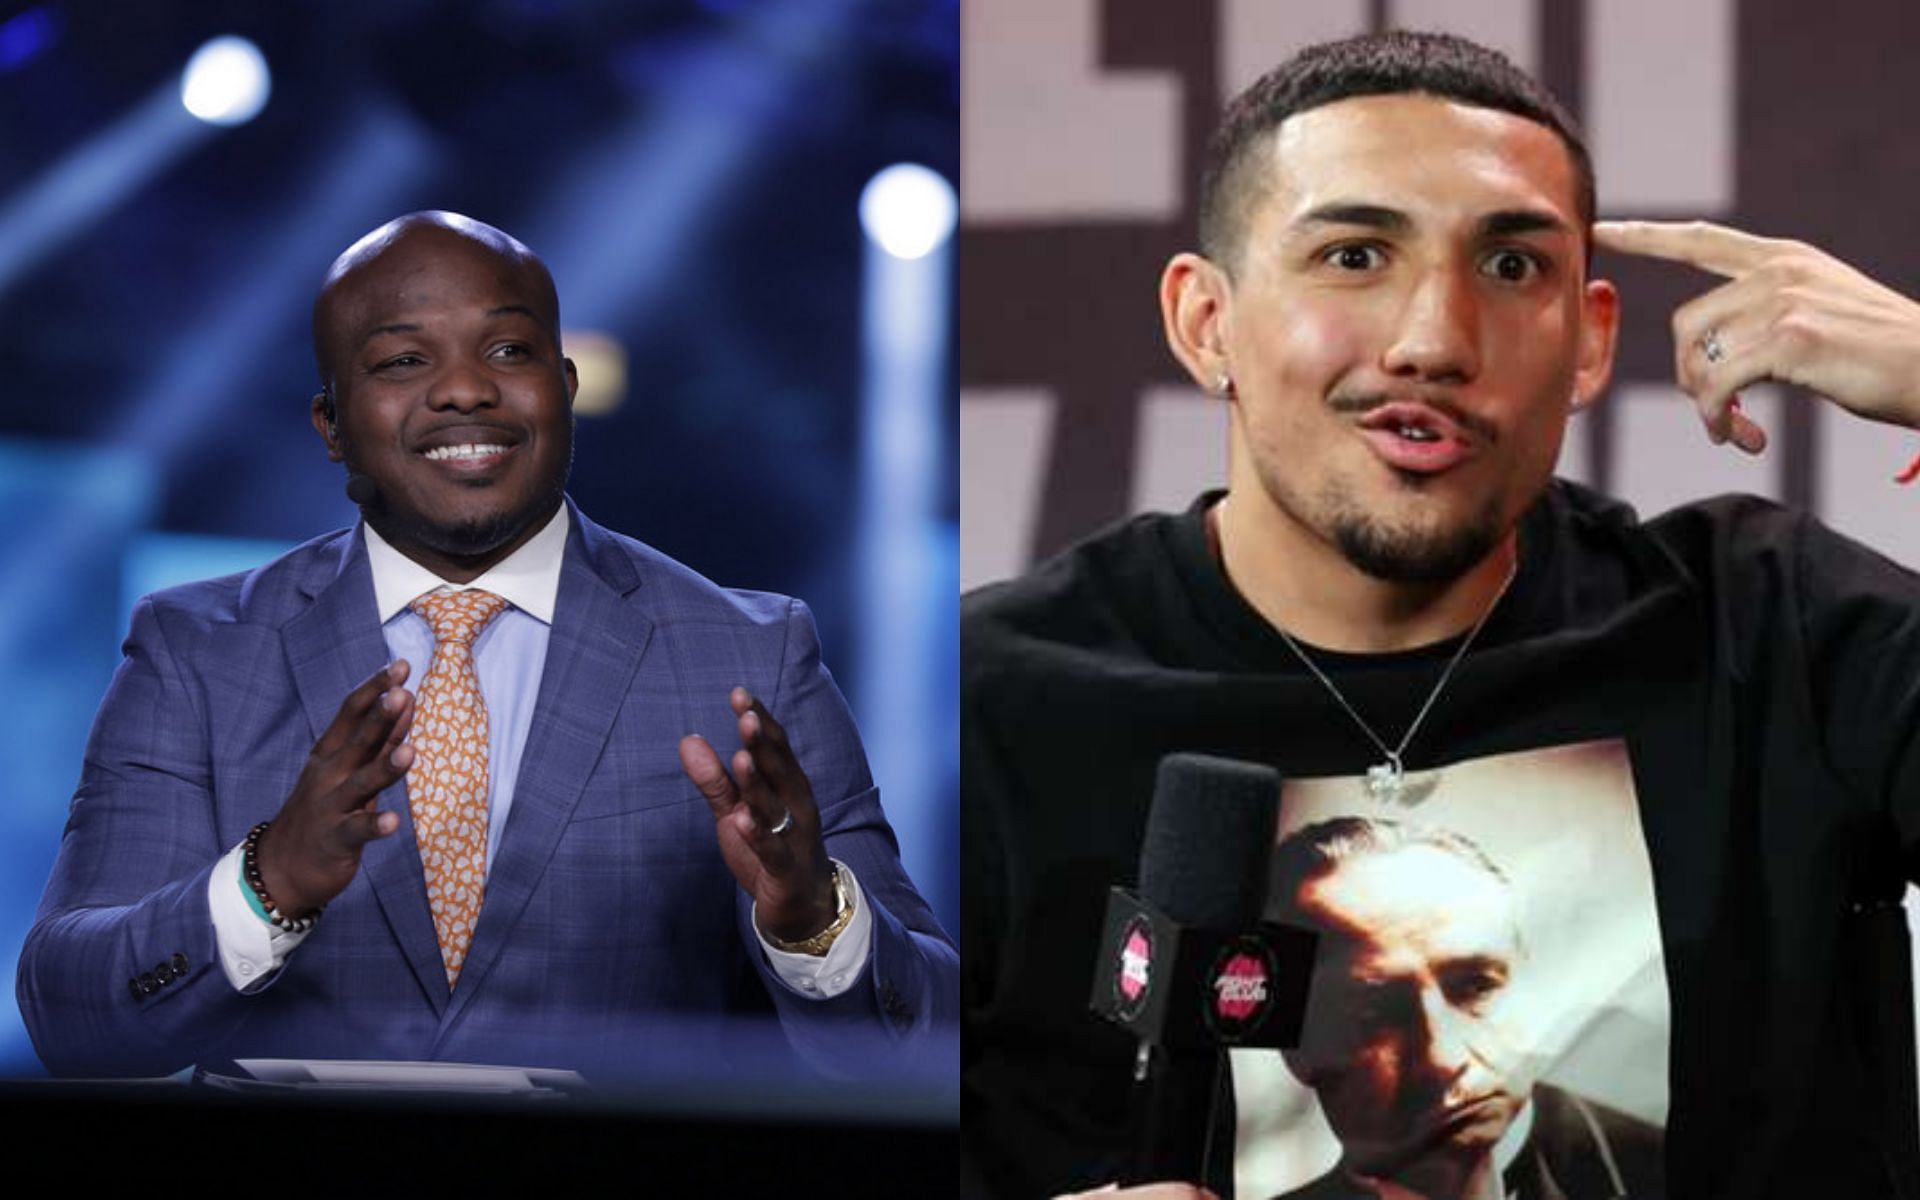 Timothy Bradley (left) and Teofimo Lopez (right)